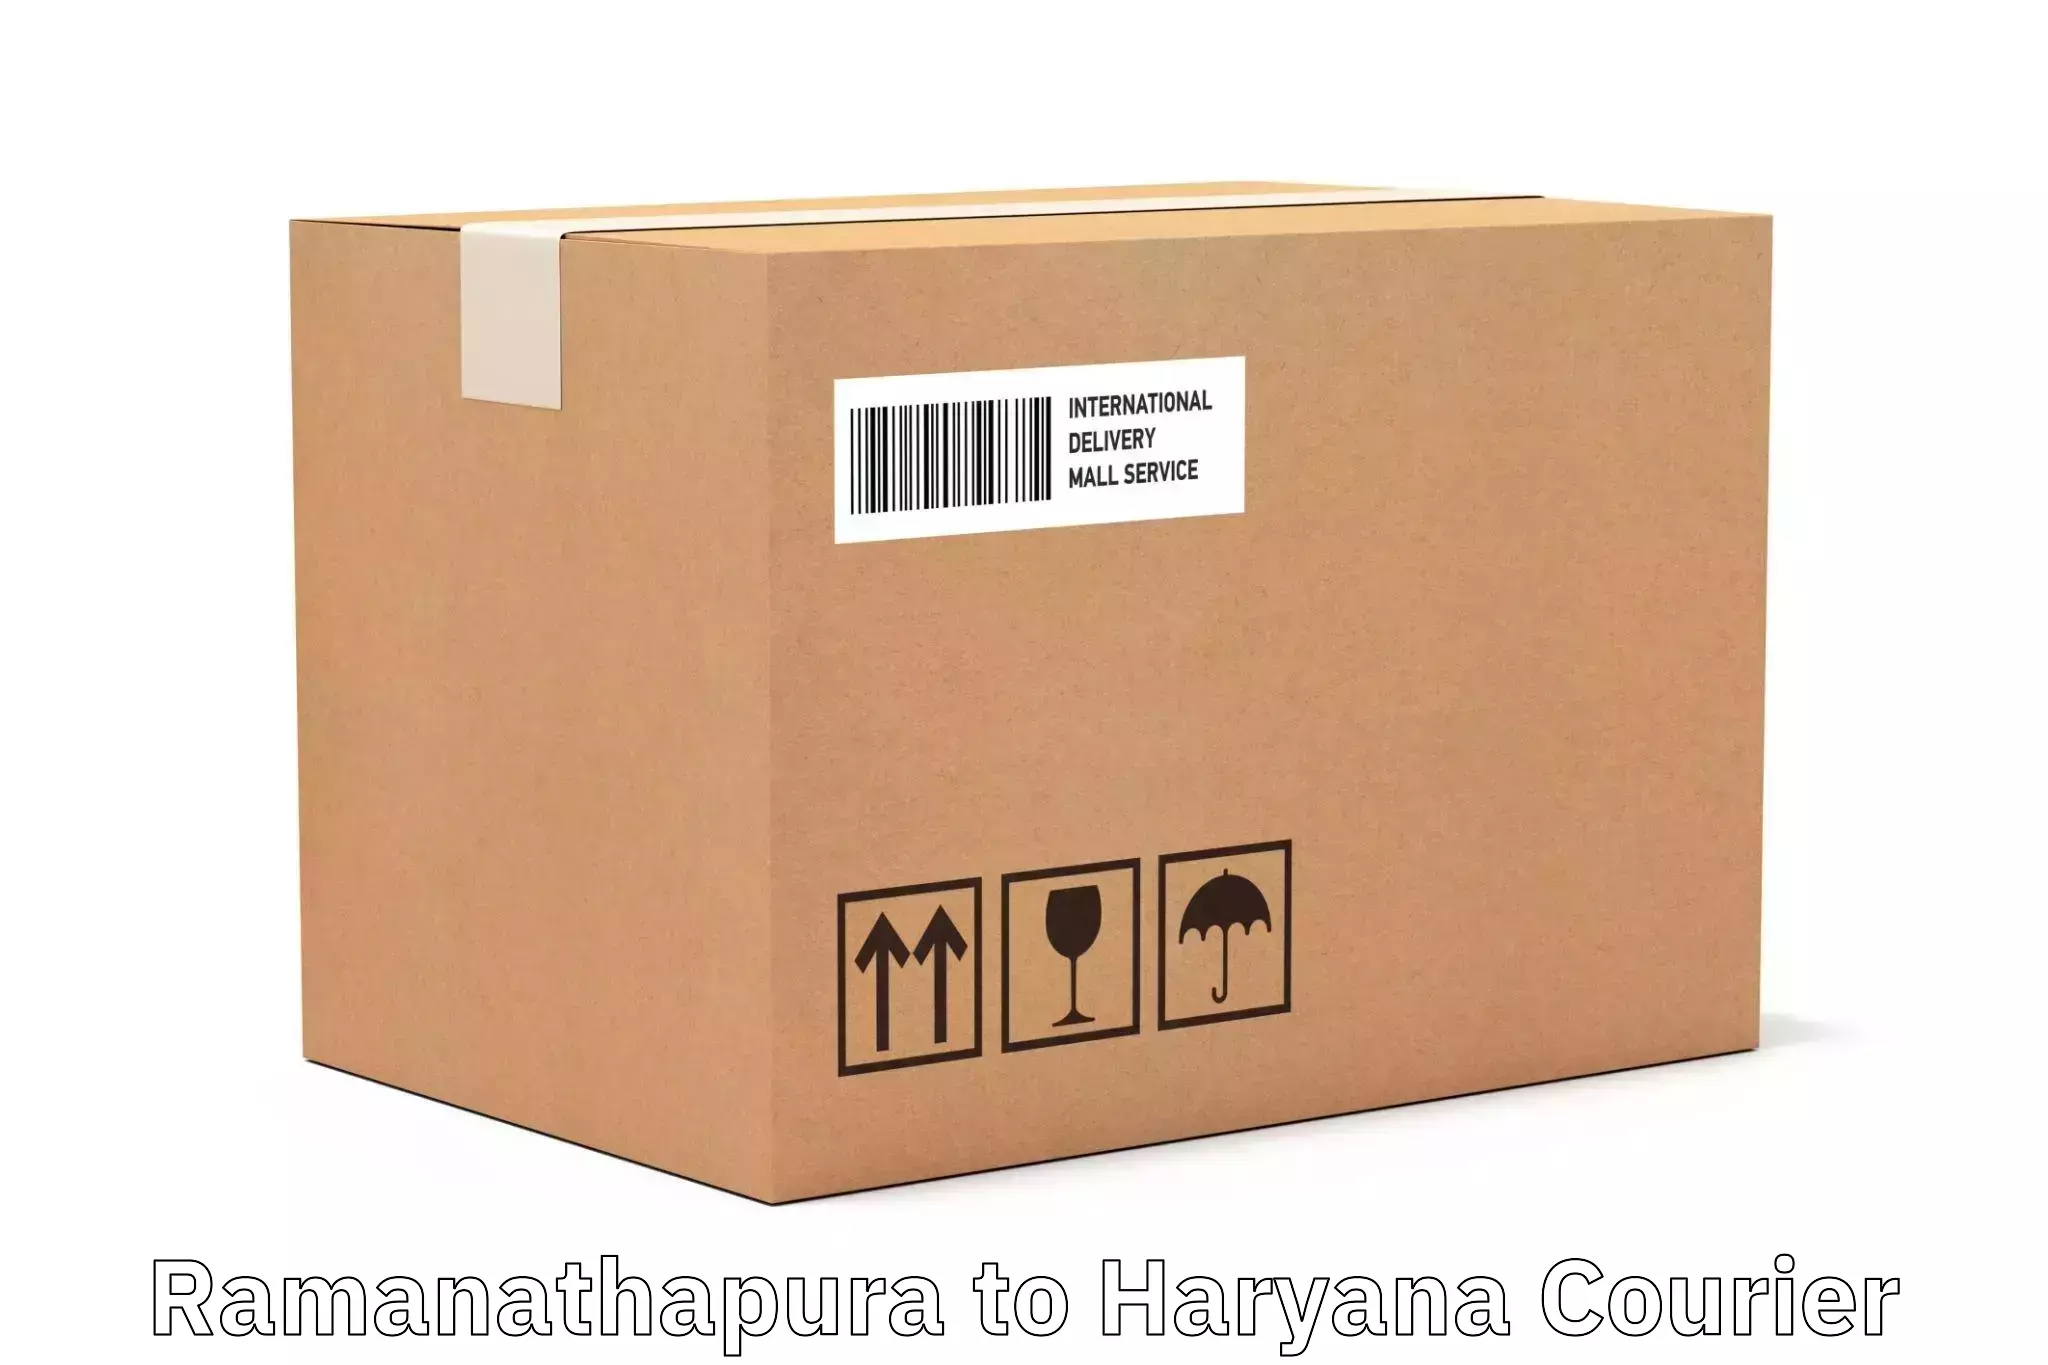 Business delivery service in Ramanathapura to Sirsa